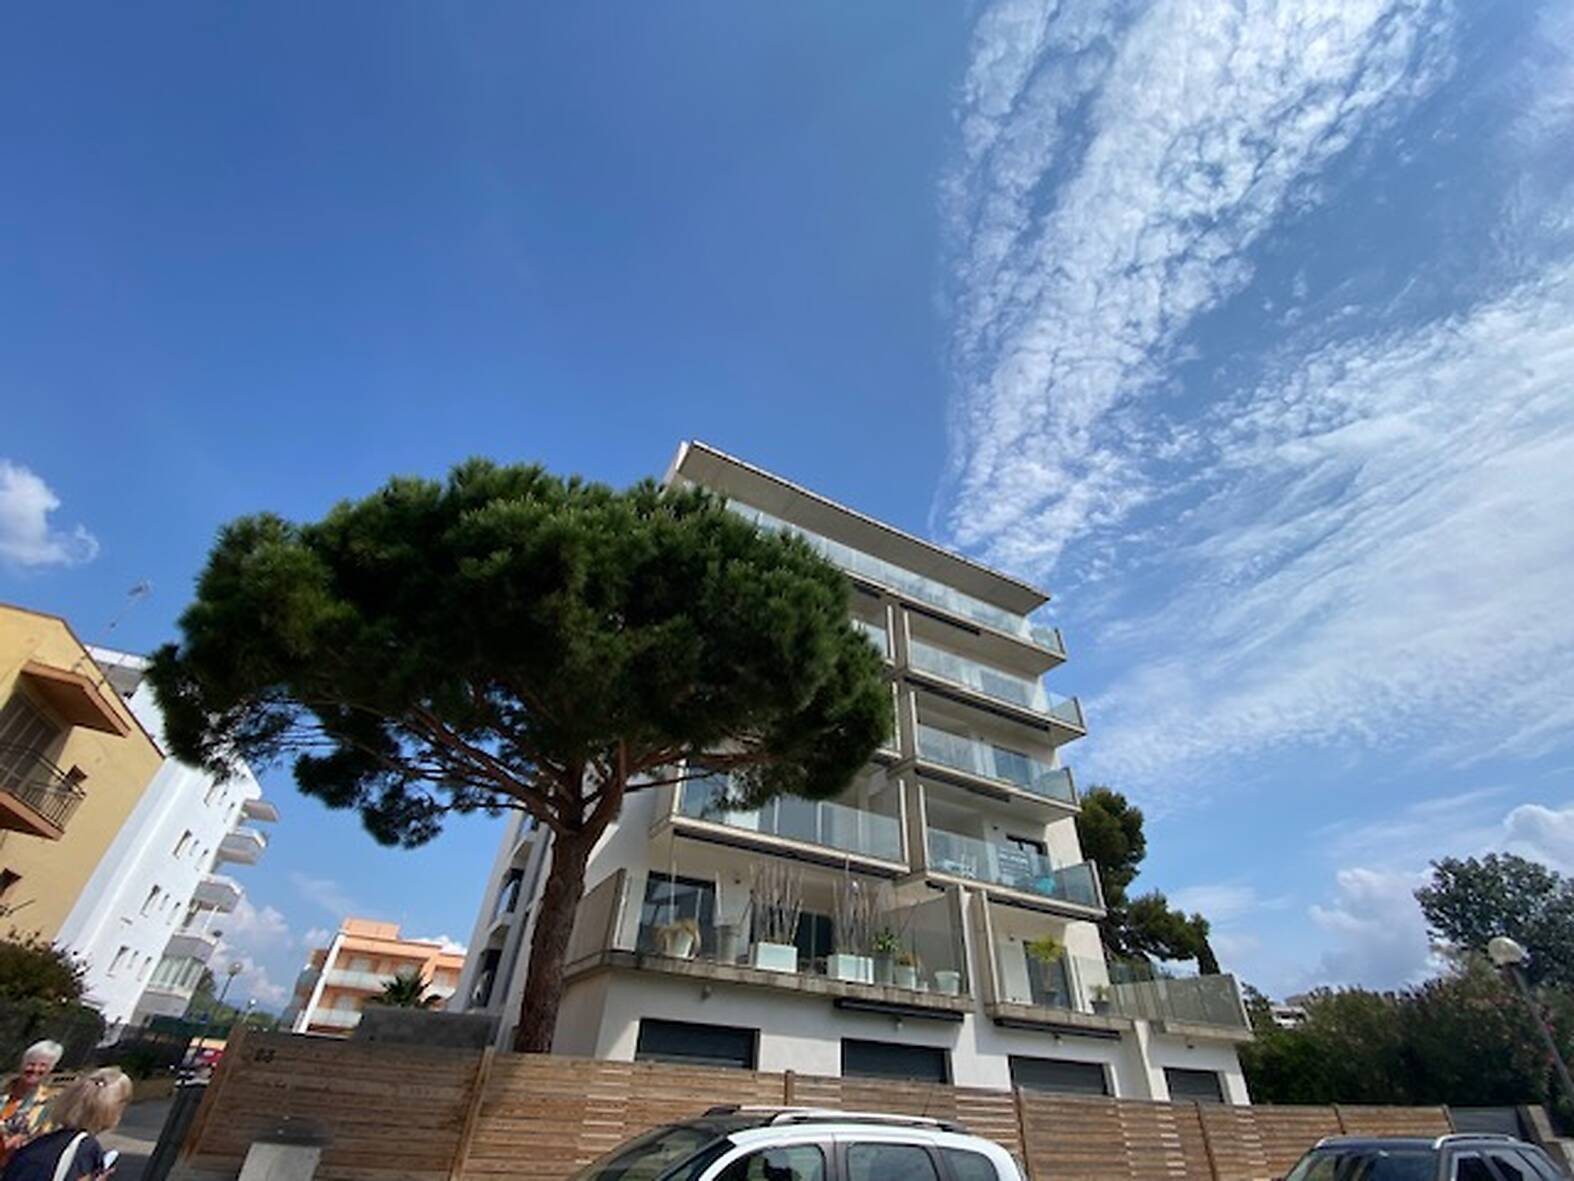 Superb modern apartment in a recent building in Rosas - Salatar